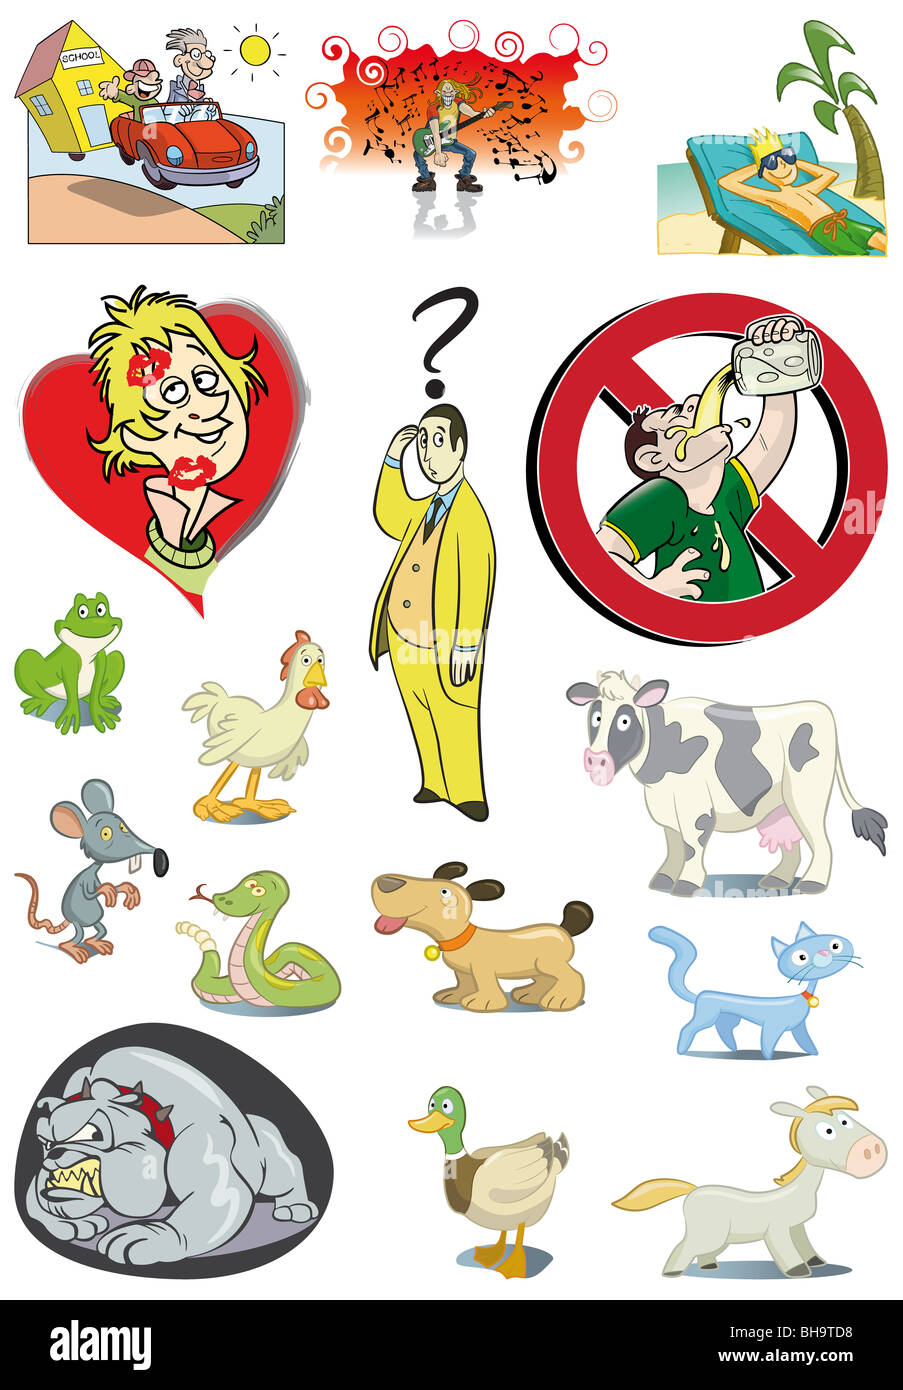 Variety of cartoon animals and characters Stock Photo